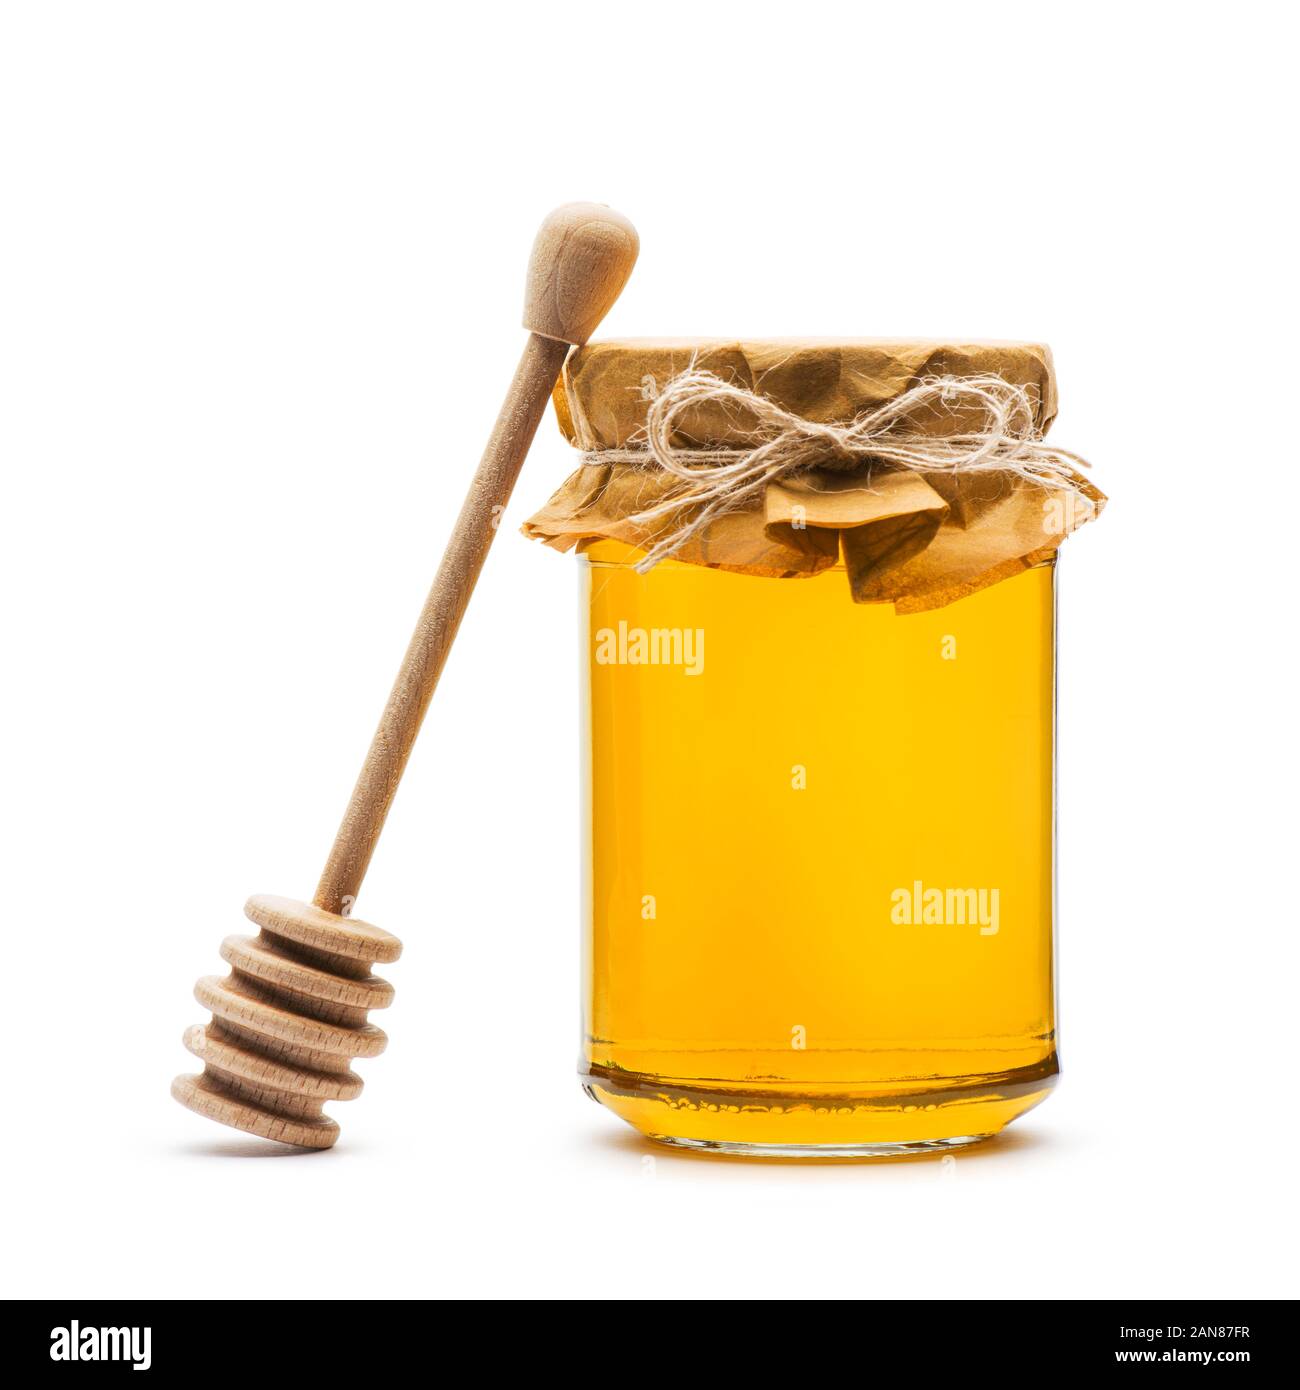 Honey jar with cap and wooden dripper, on white background Stock Photo